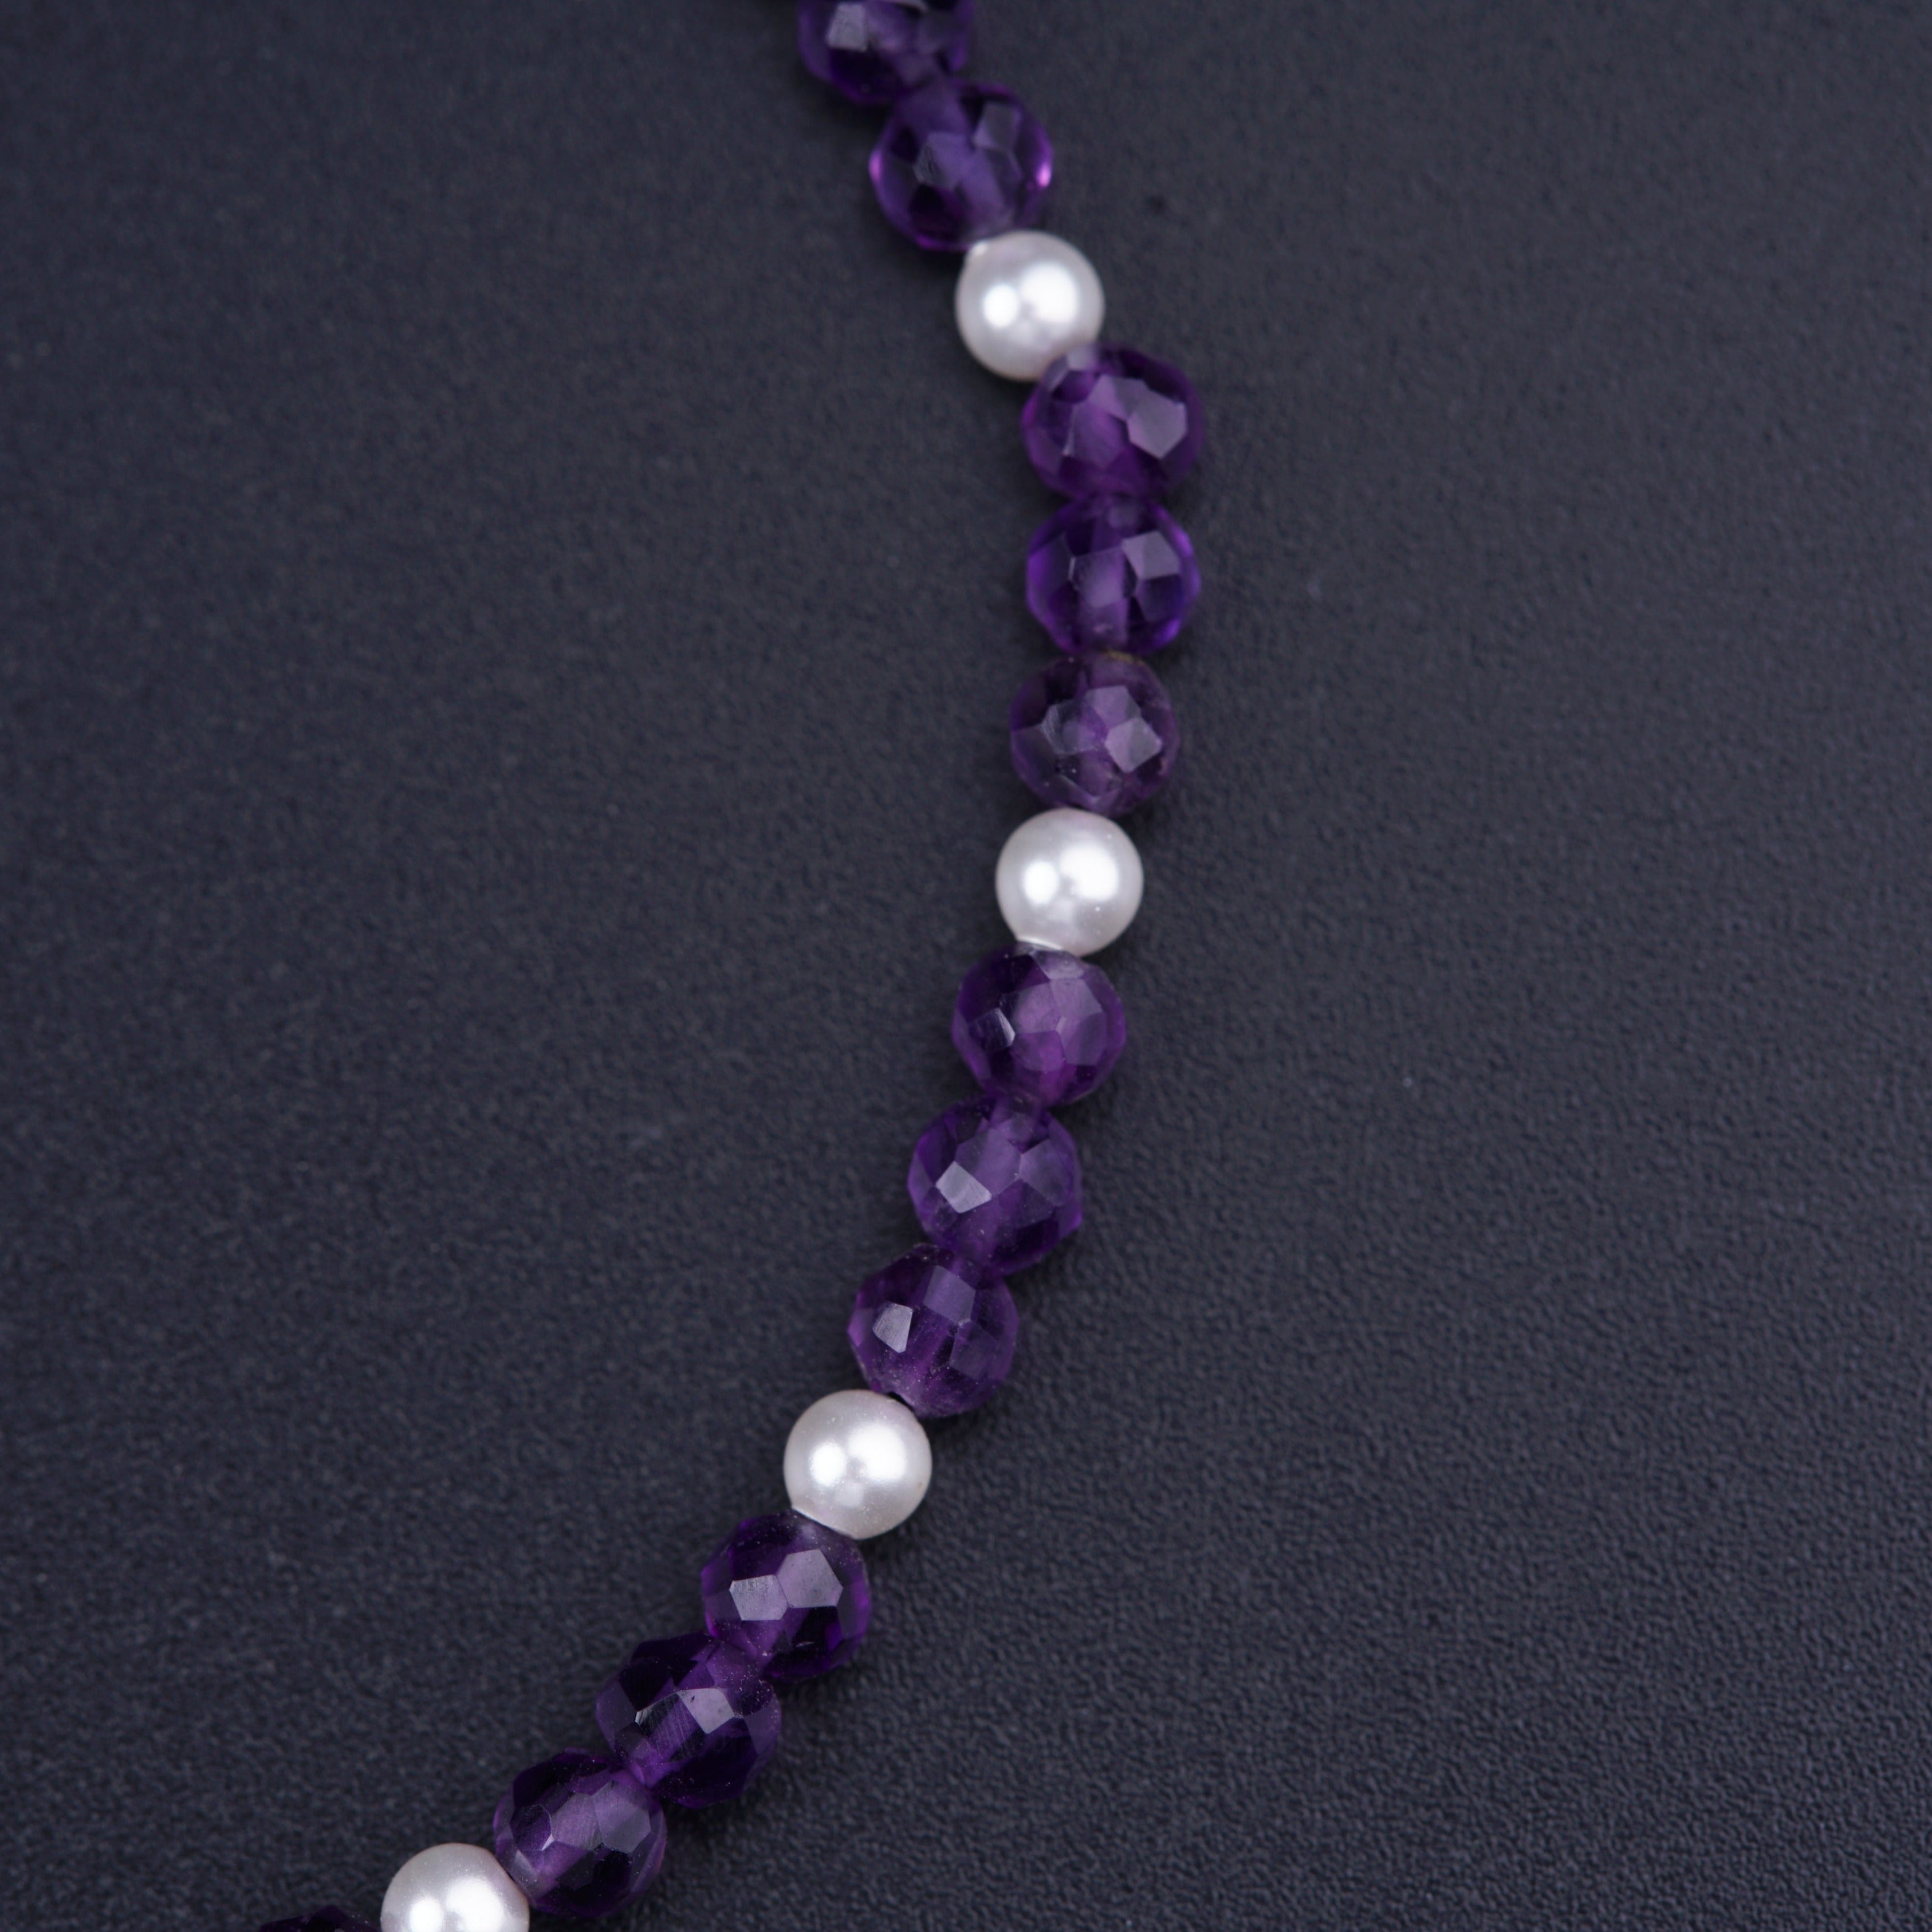 a necklace with pearls and amethyst beads